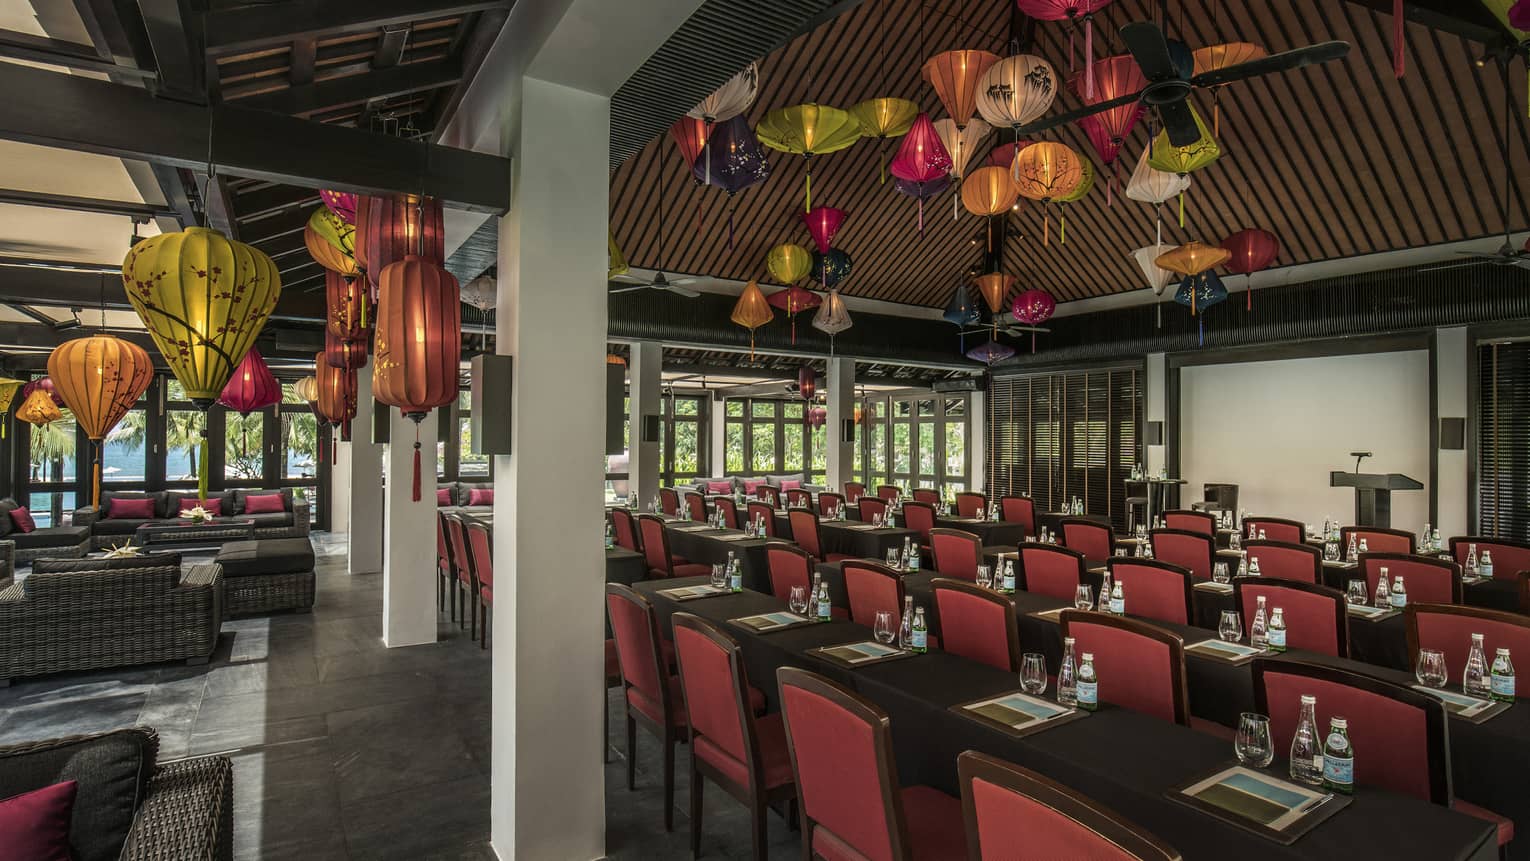 Meeting room by ocean with long tables, chairs, couches, wooden ceiling, colourful paper lanterns